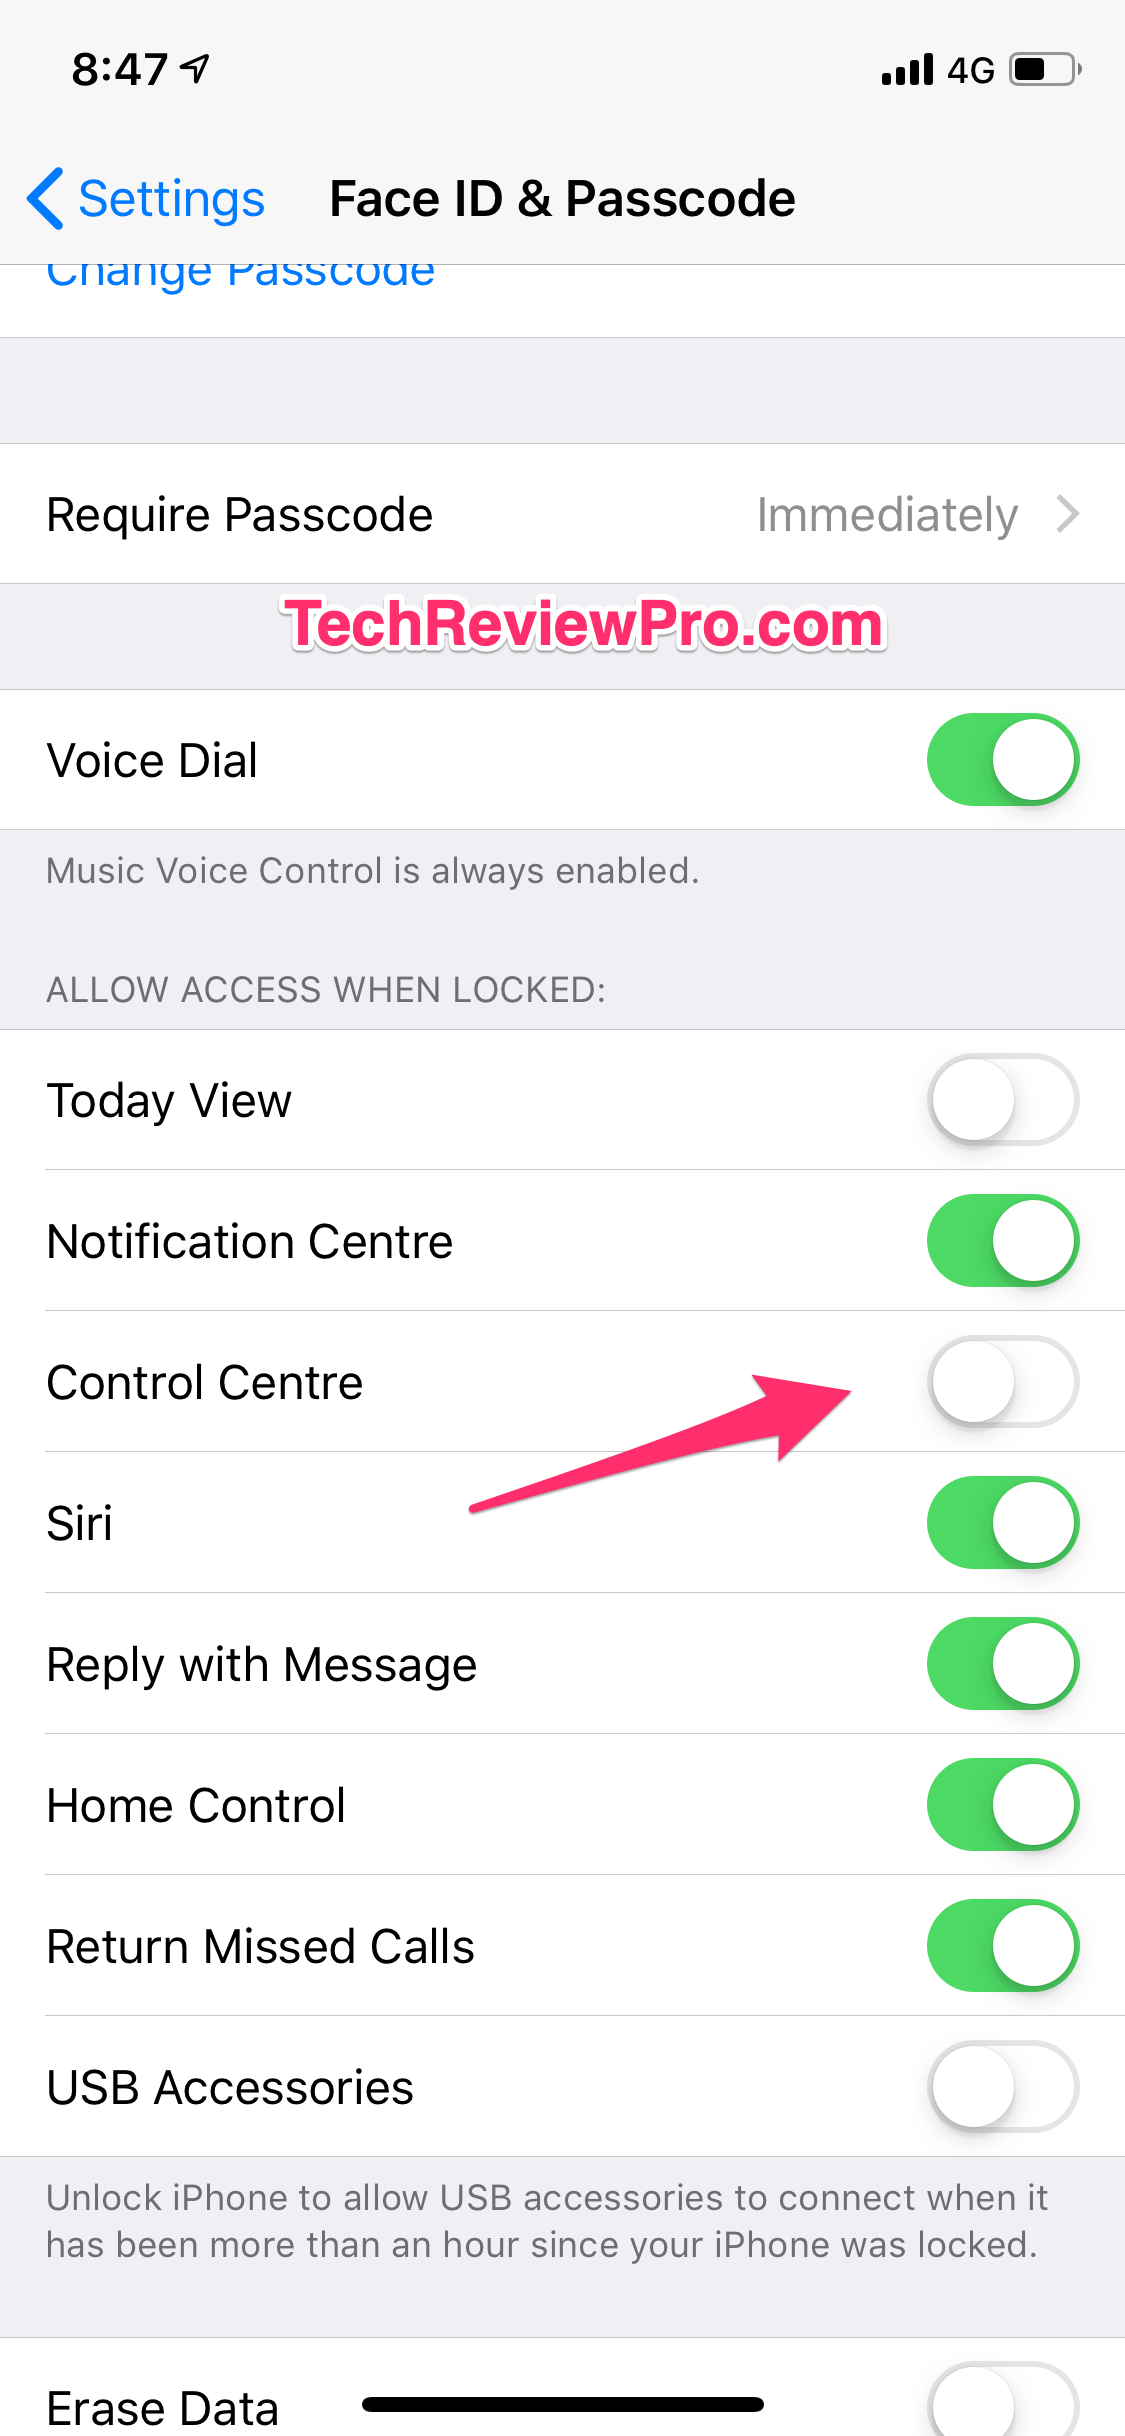 Turn Off Control Centre Access on Lock Screen